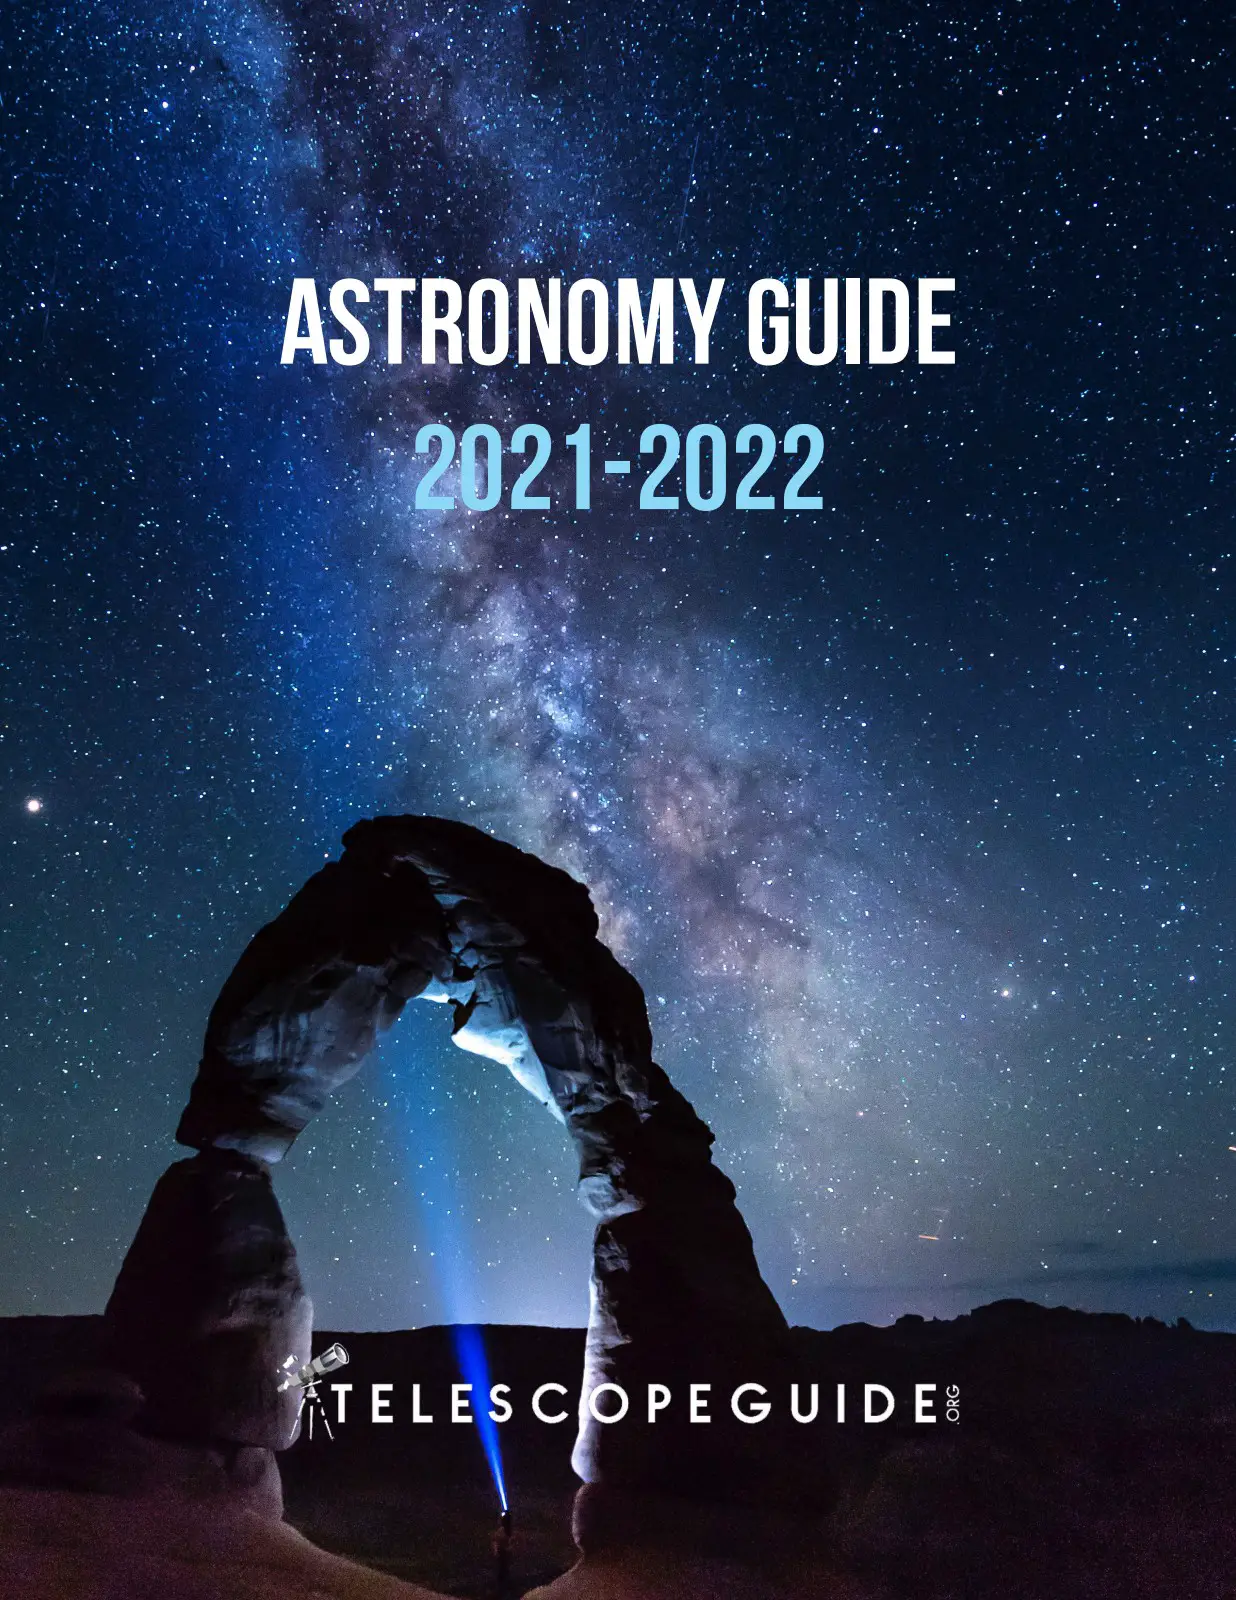 Astronomy Calendar 2022 Pdf Download.Download Or Share Astronomy Guide 2021 2022